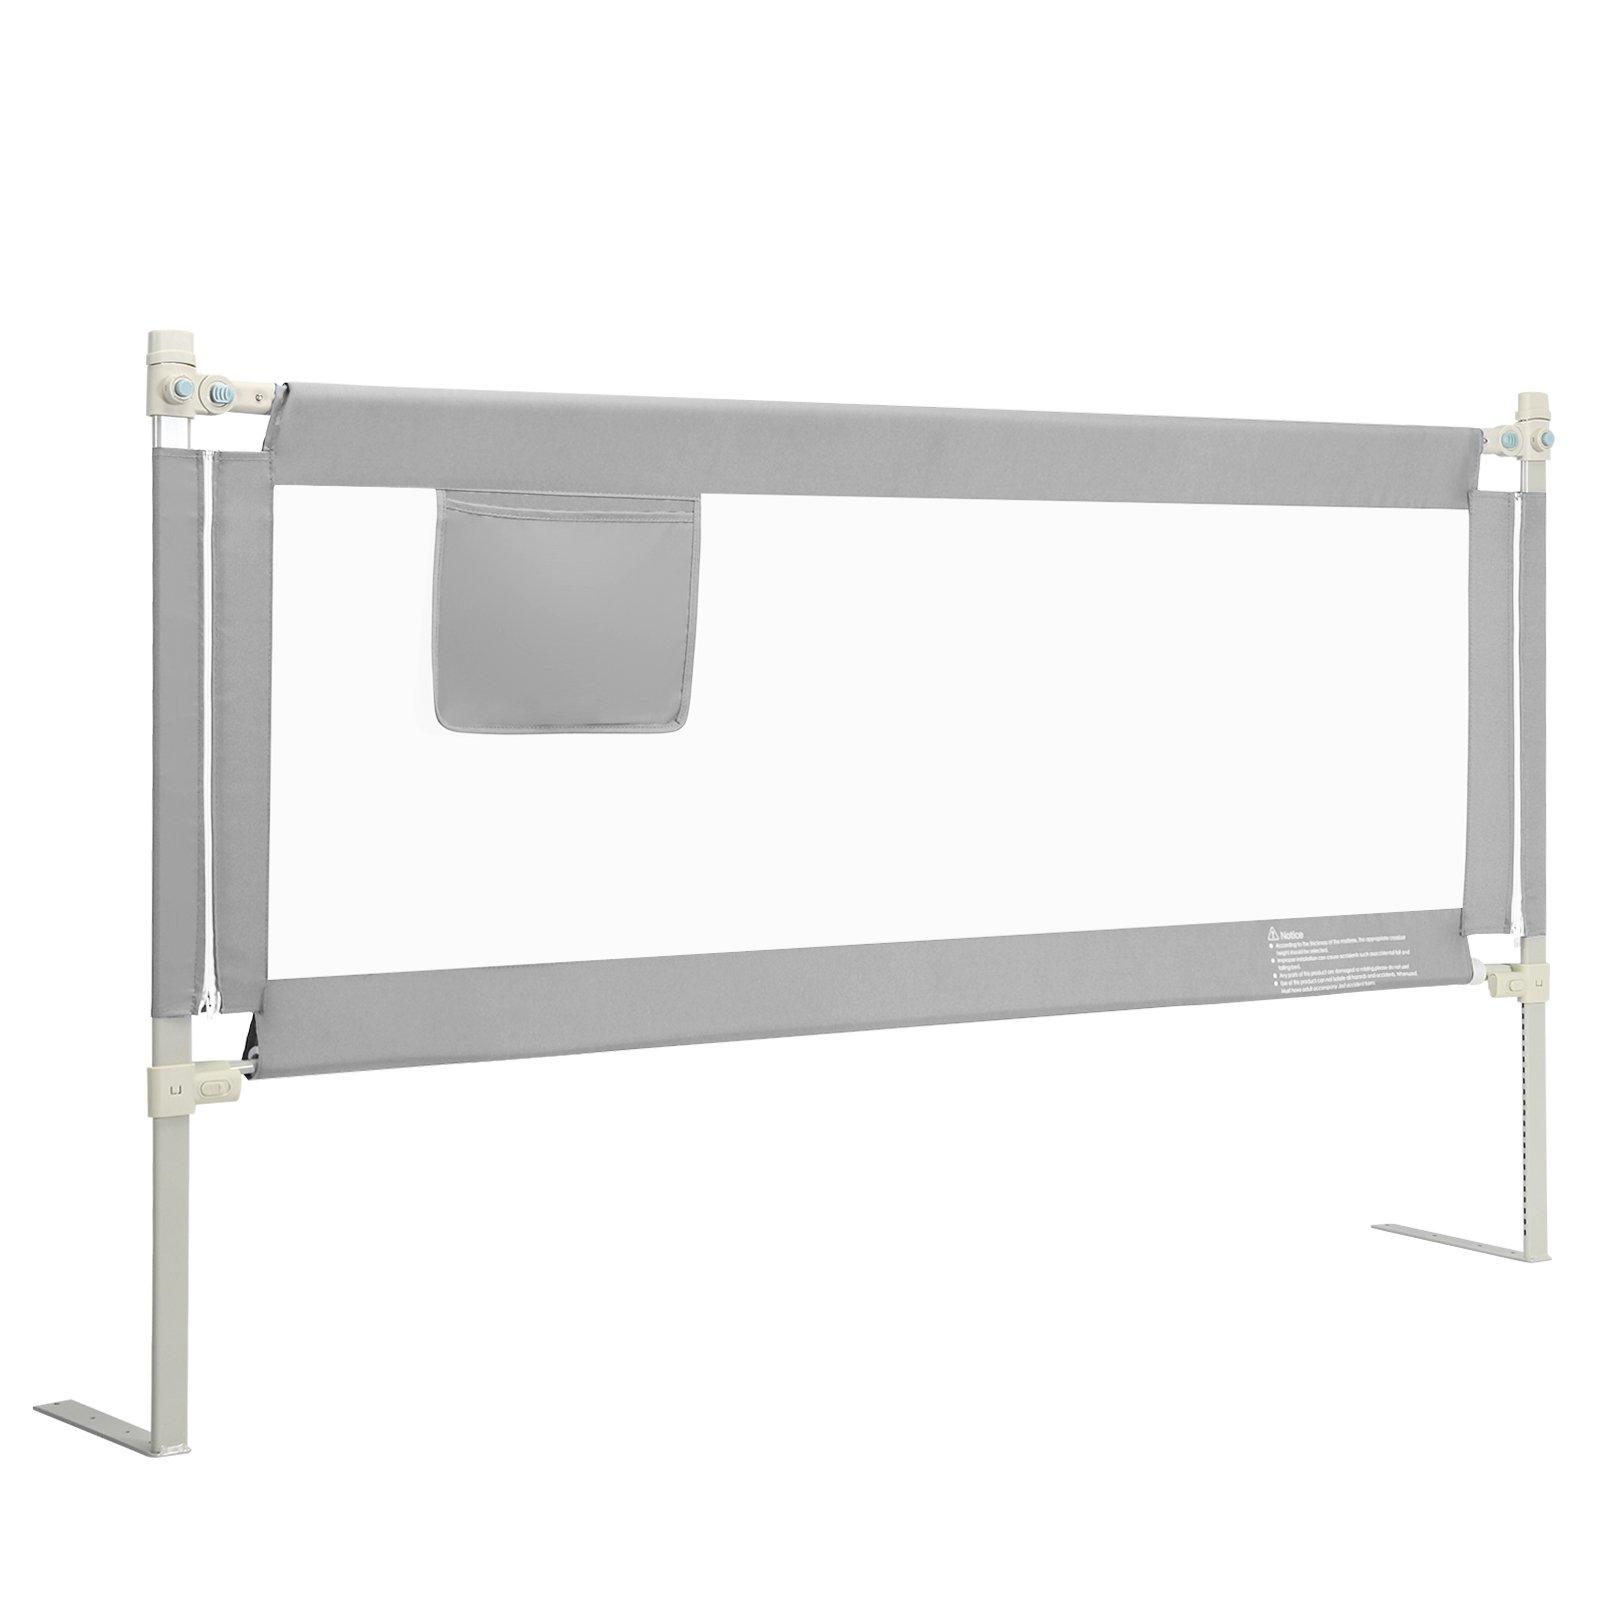 196cm Height Adjustable Bed Rail with Double Safet